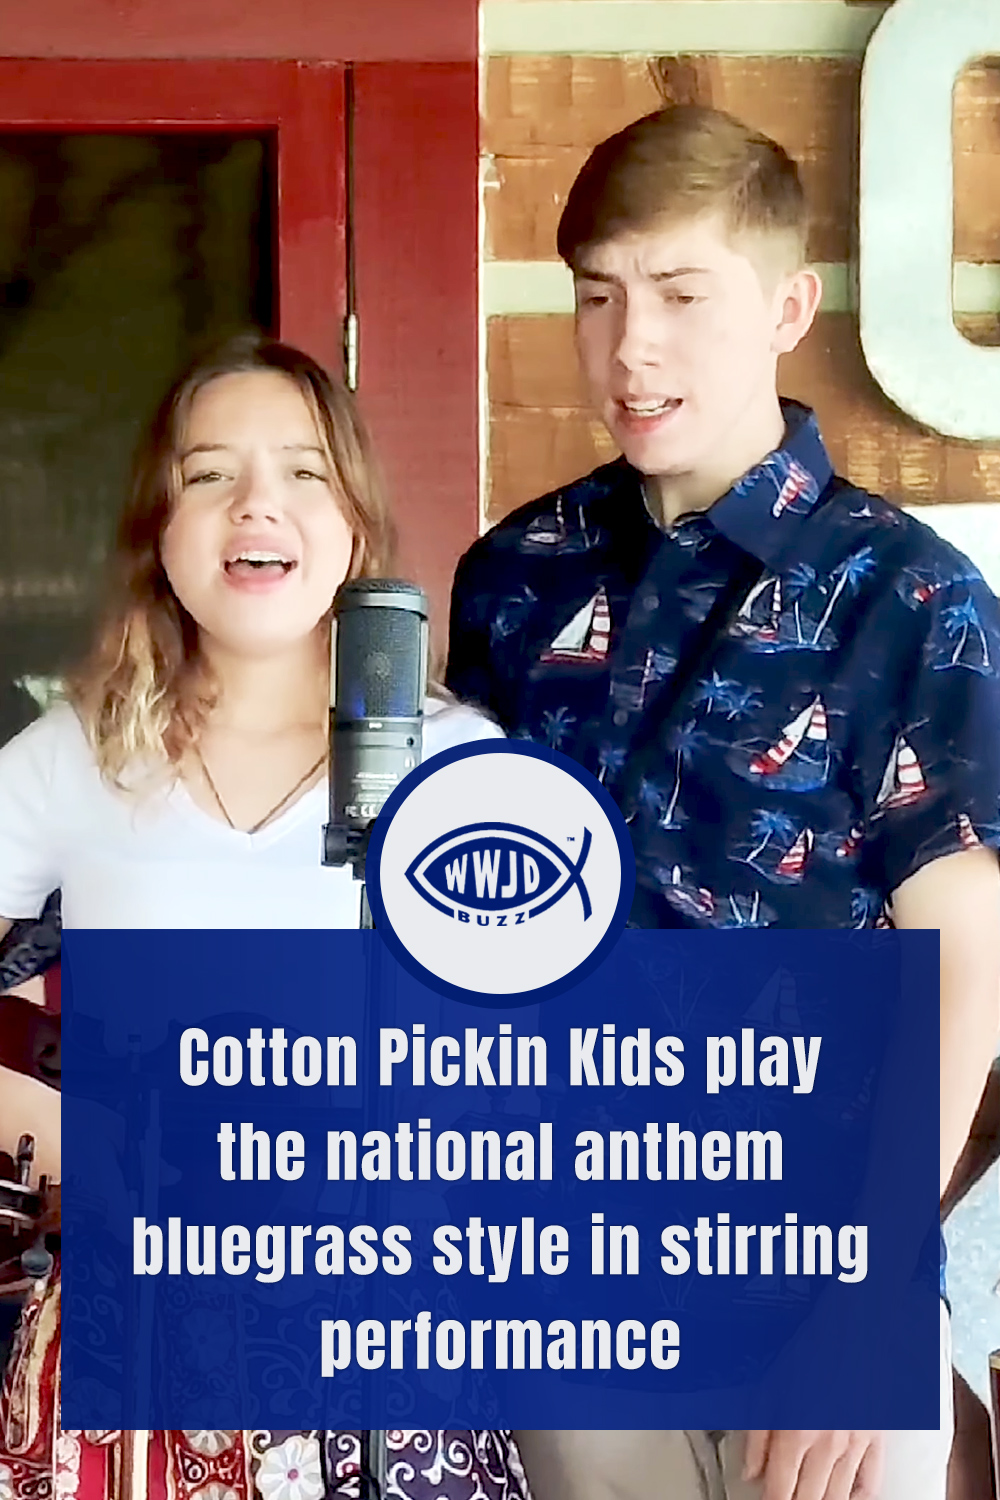 Cotton Pickin Kids play the national anthem bluegrass style in stirring performance